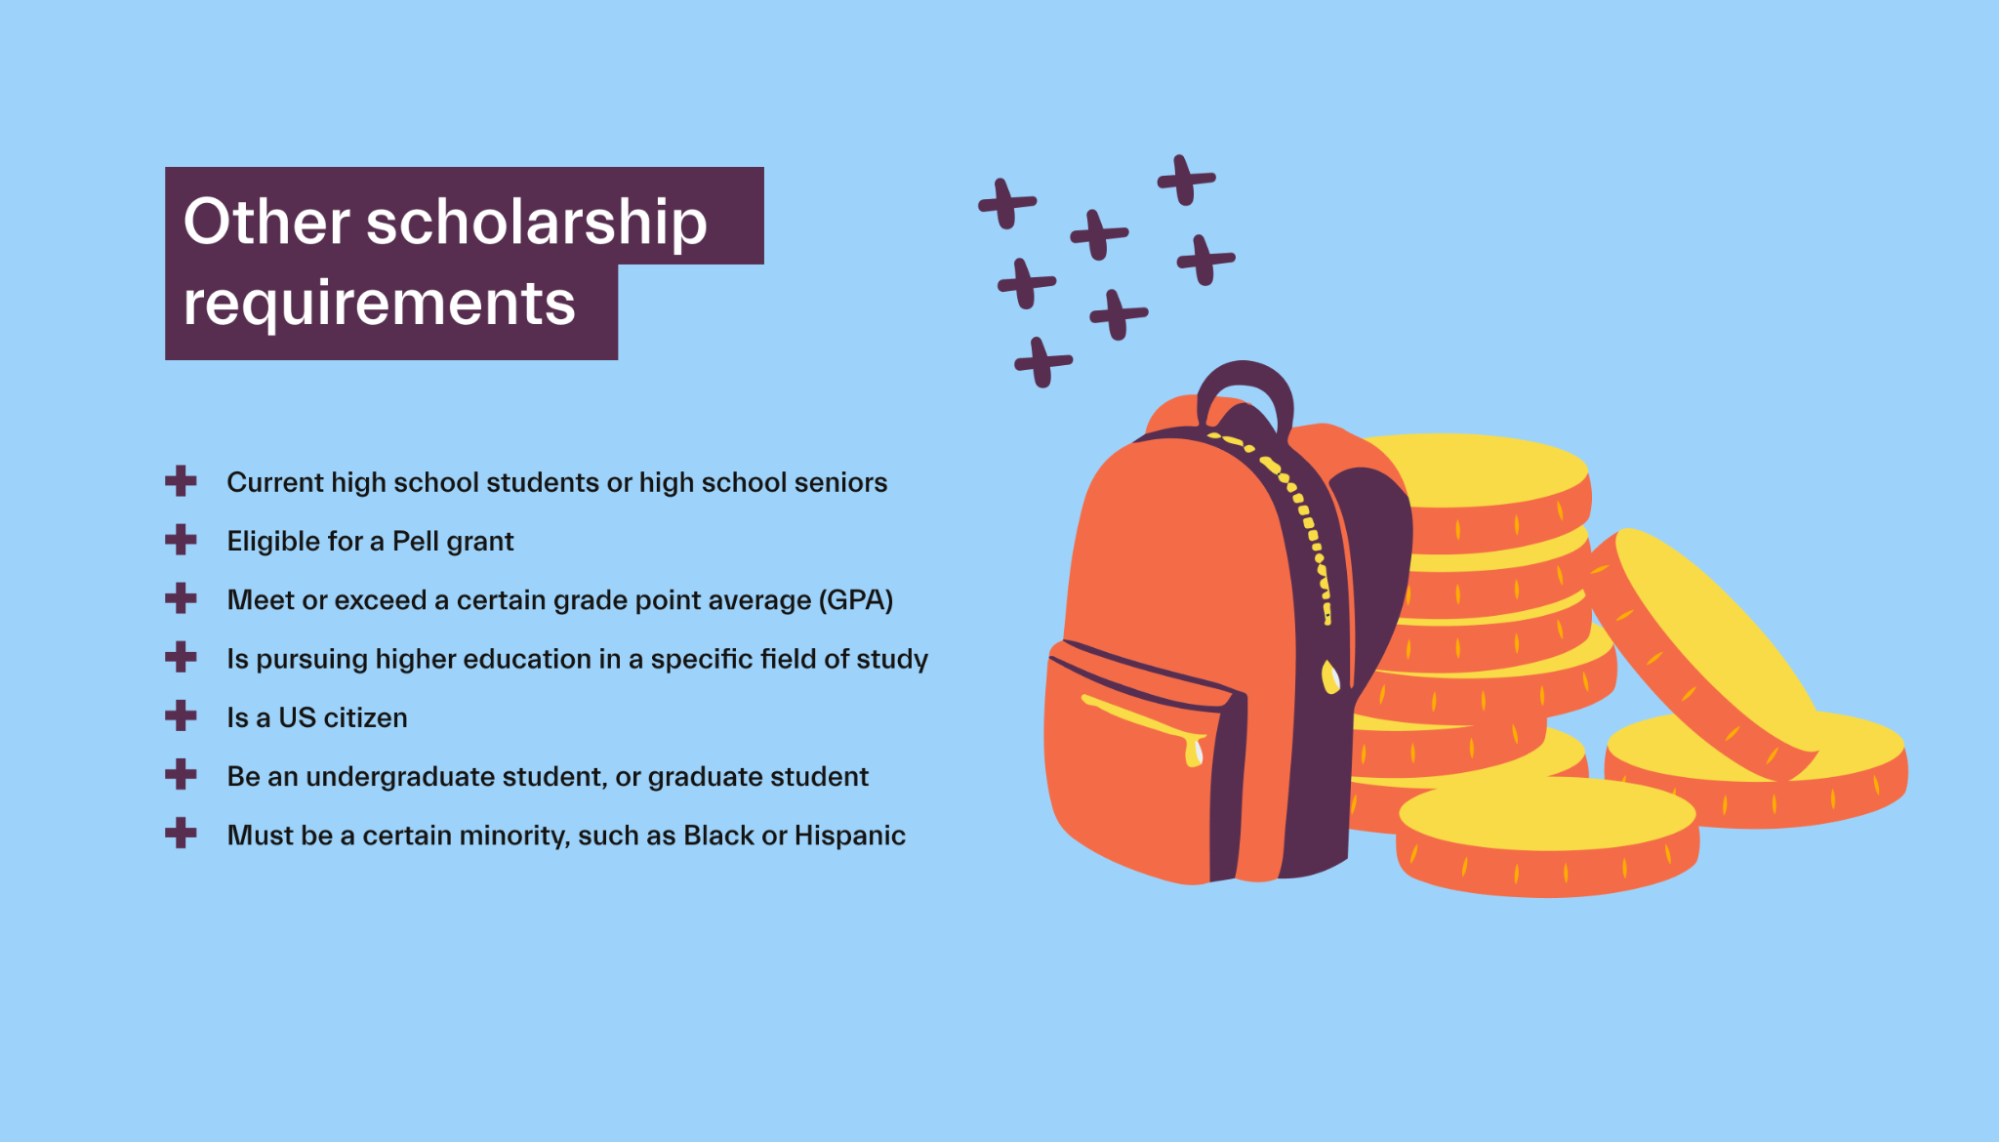 Other scholarship requirements